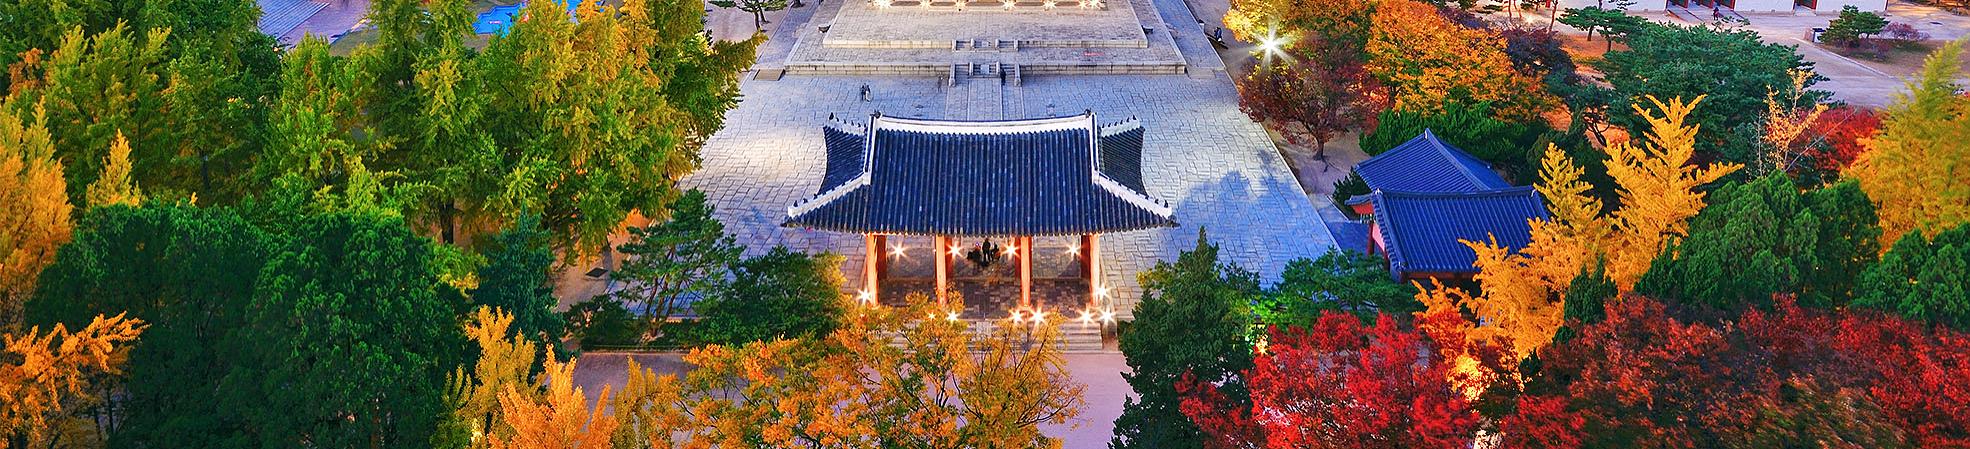 Top 10 Attractions to Visit in South Korea